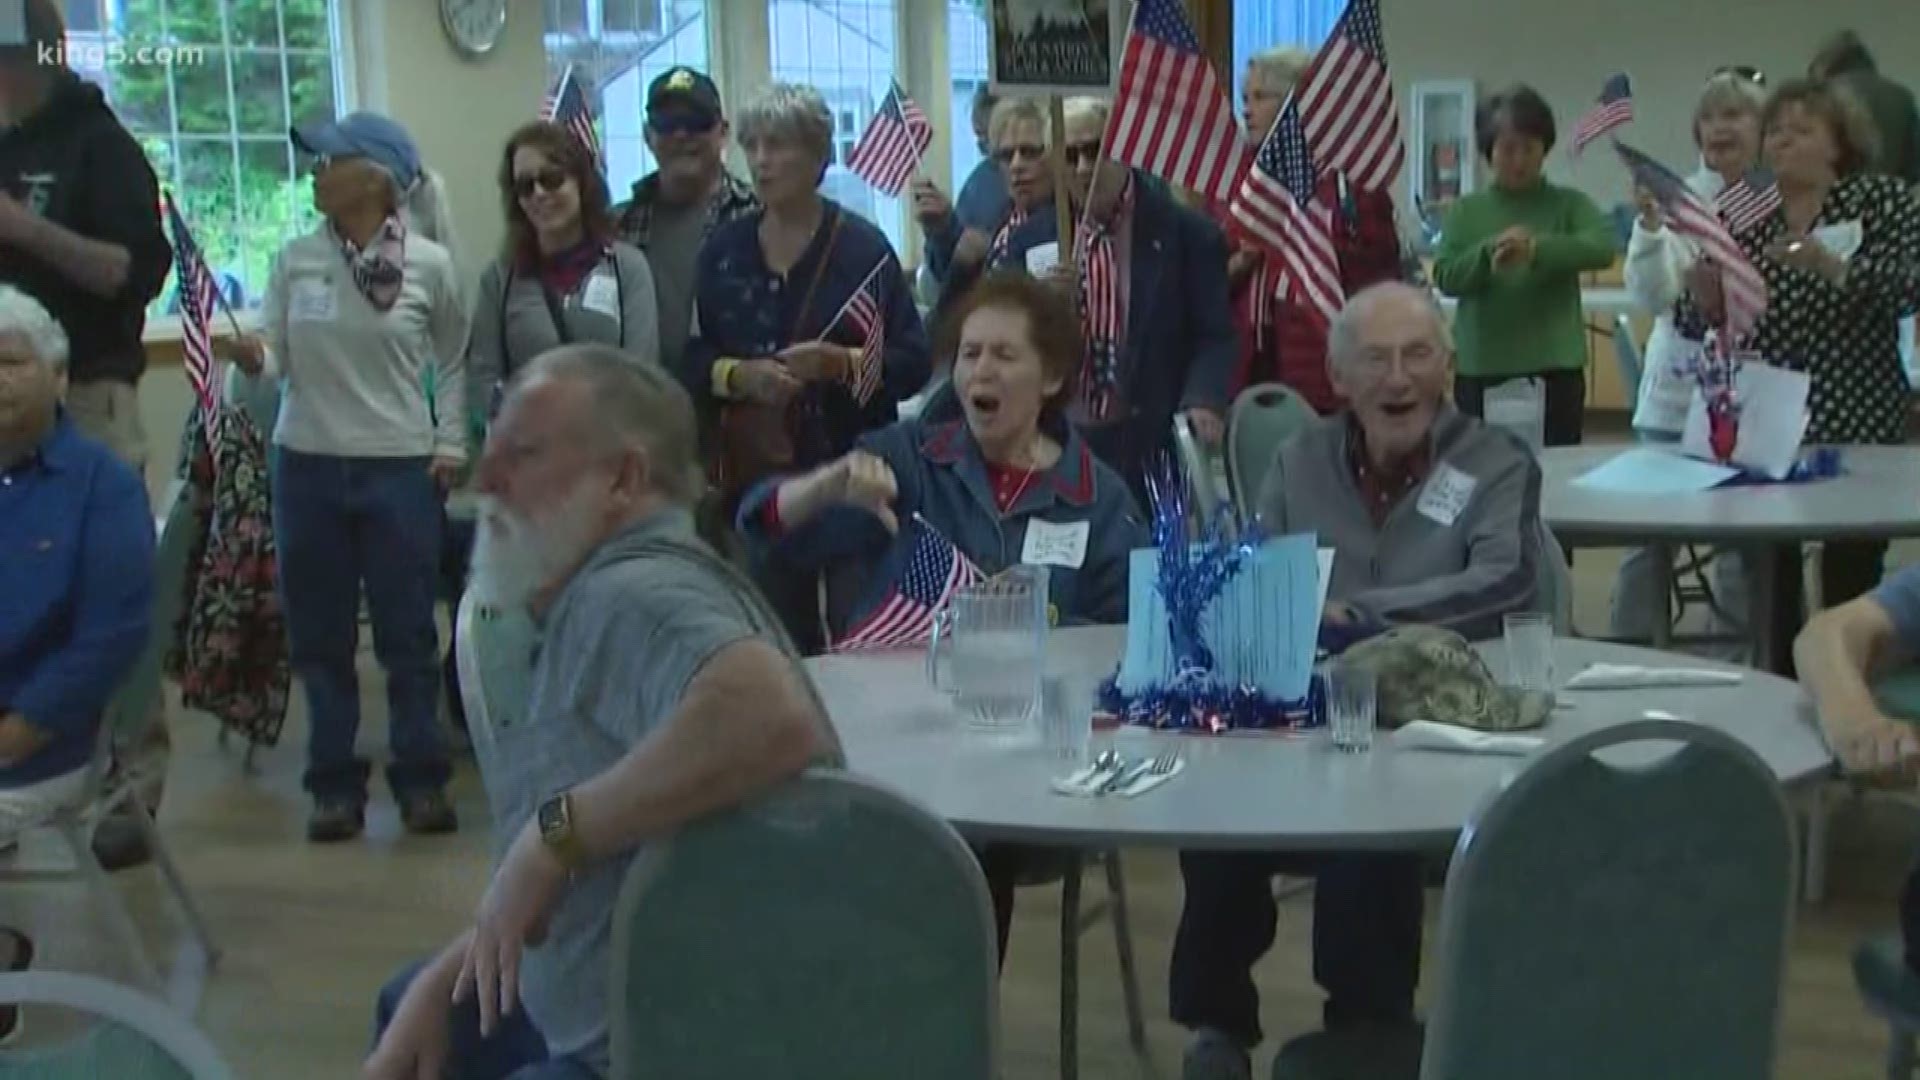 Patriotism and political correctness clashed at a Friday Harbor senior center after the Pledge of Allegiance and the American flag were banned.